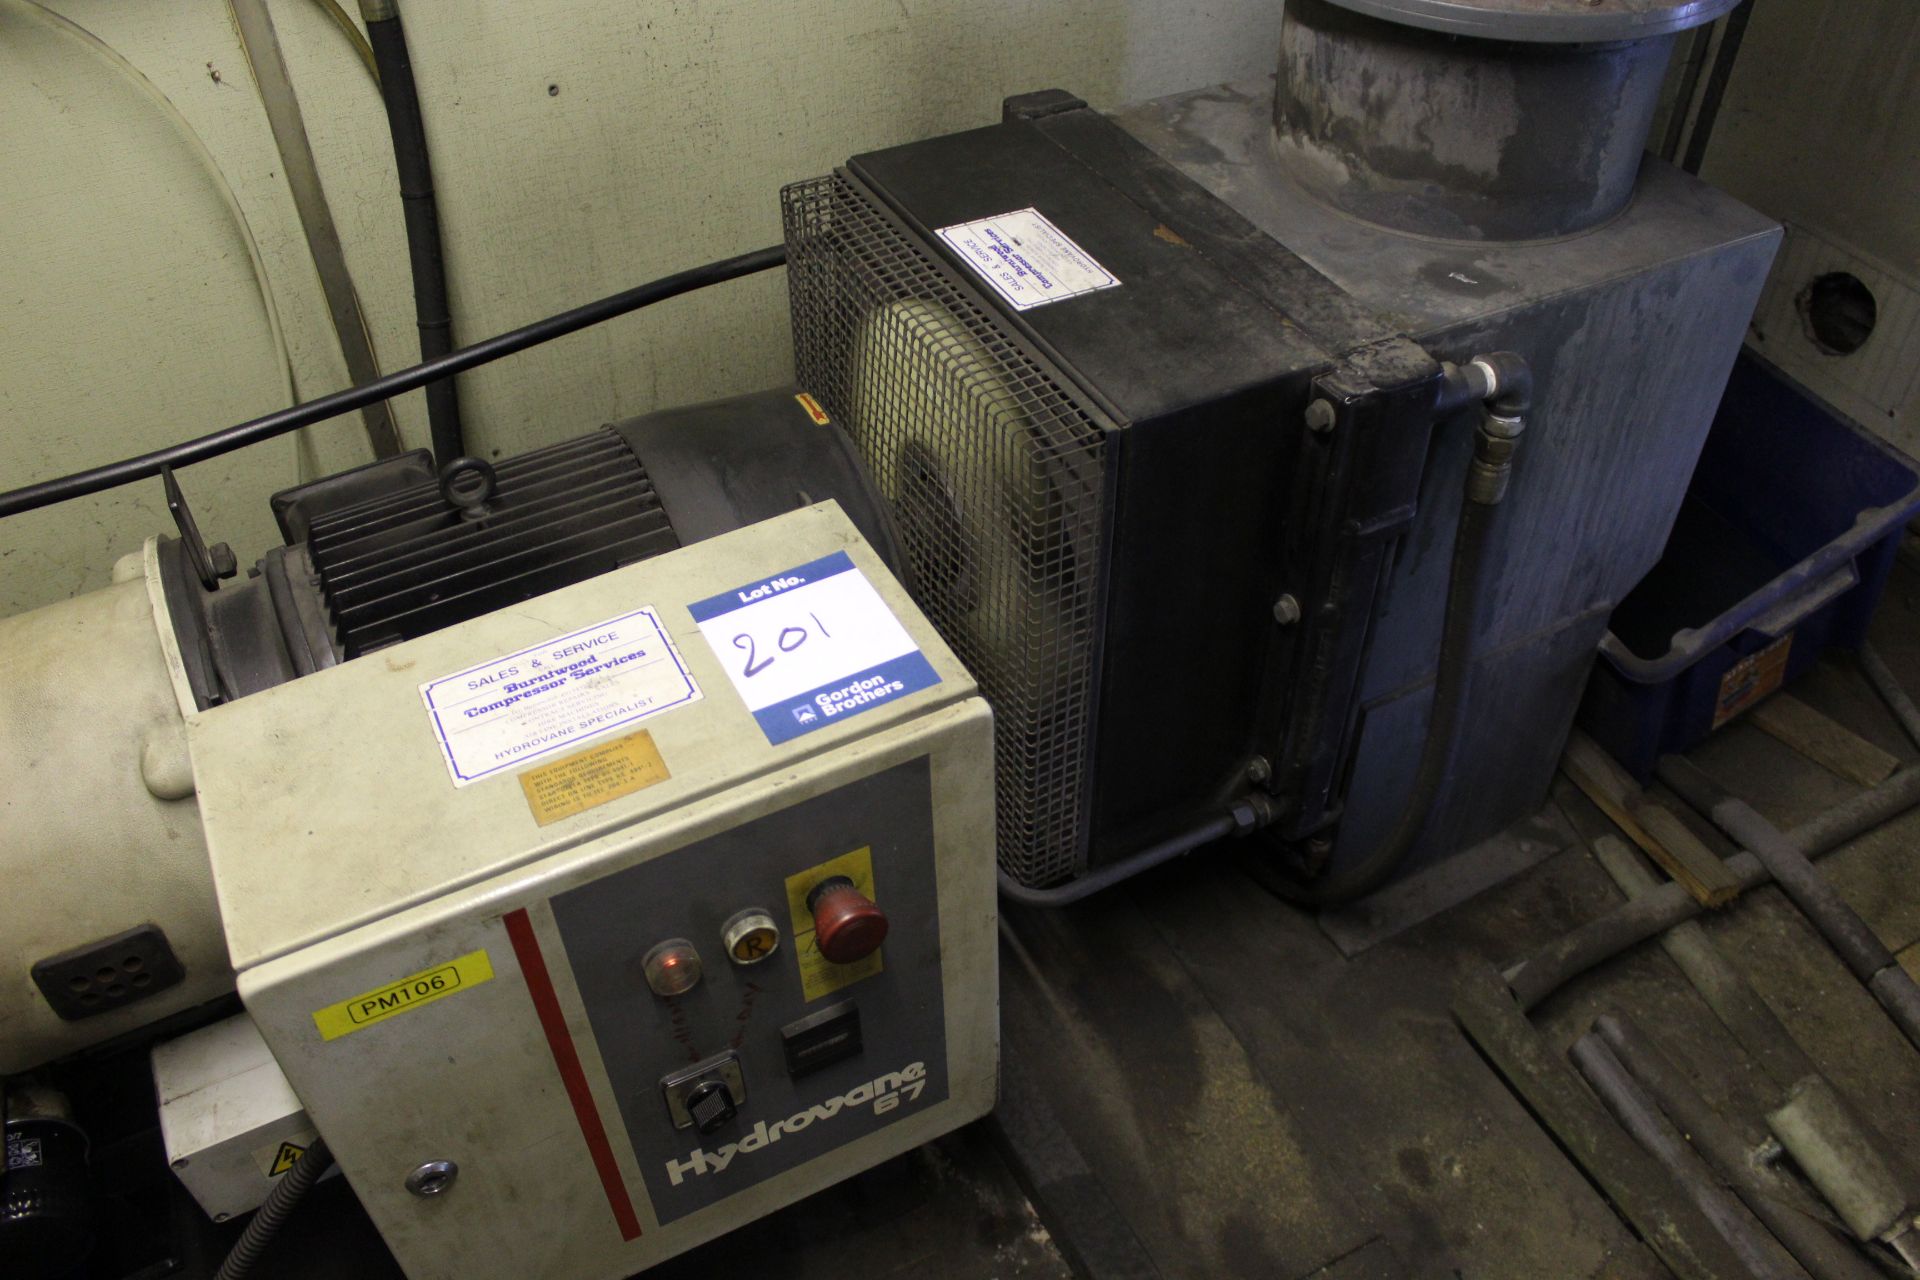 Hydrovane 67 Model: 06708-000 rotary vane air compressor, Serial No. 8909HV771304/3 with Abac Dry - Image 4 of 10